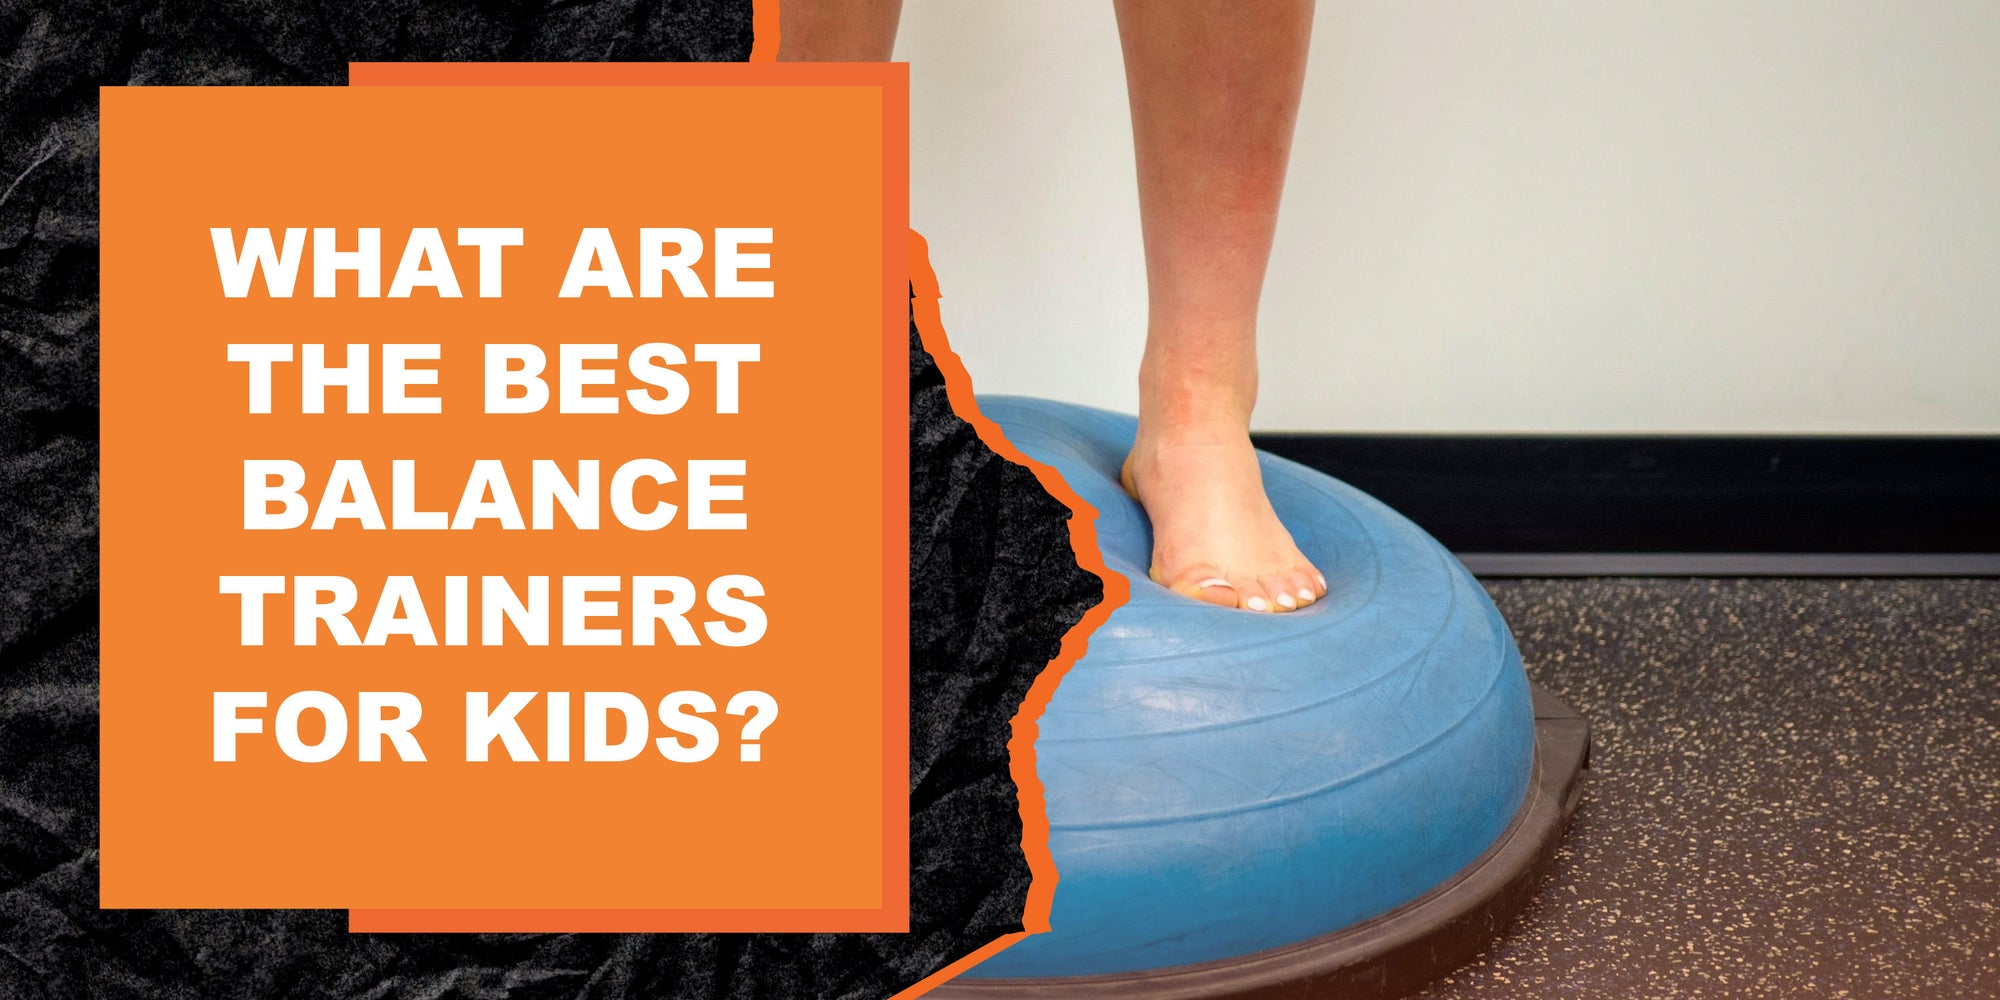 What Are the Best Balance Trainers For Kids?